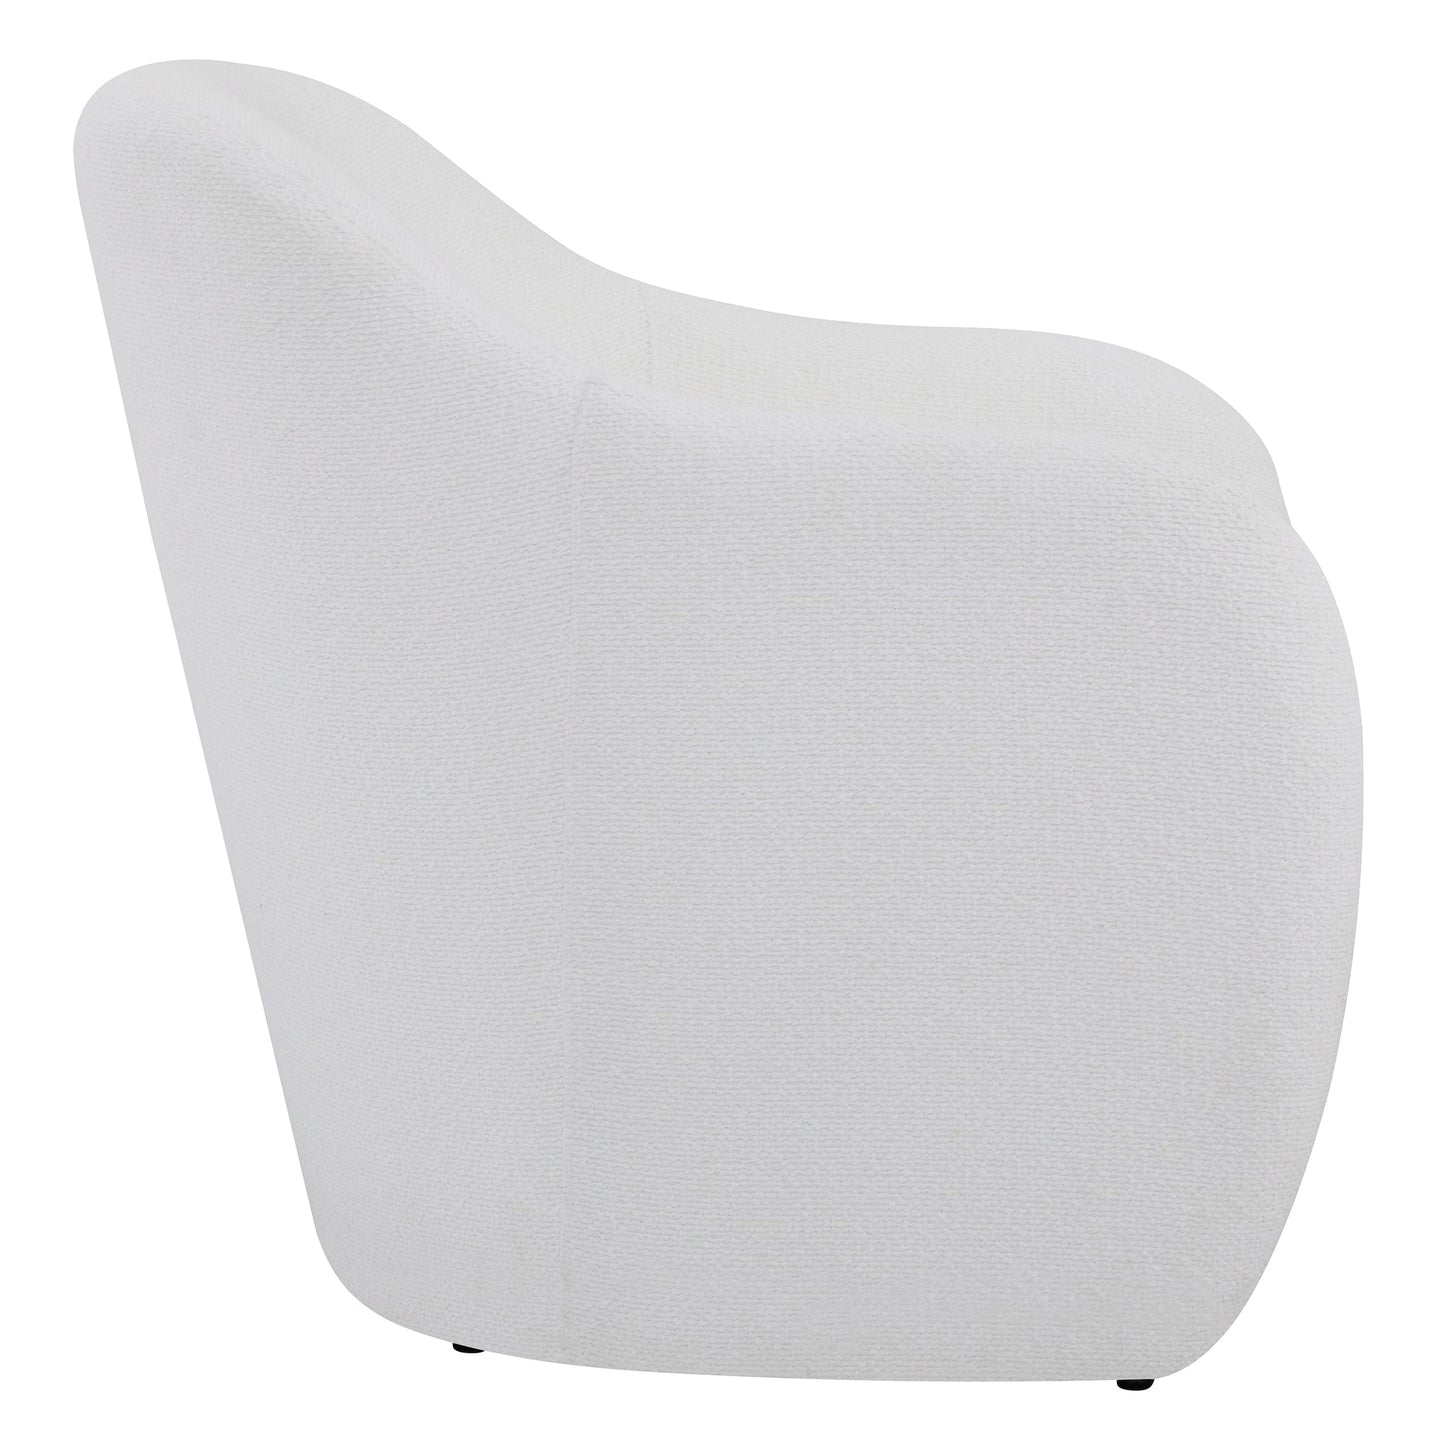 CHITA LIVING-Doris Modern Boucle Accent Chair-Accent Chair-Performance Fabric-White-